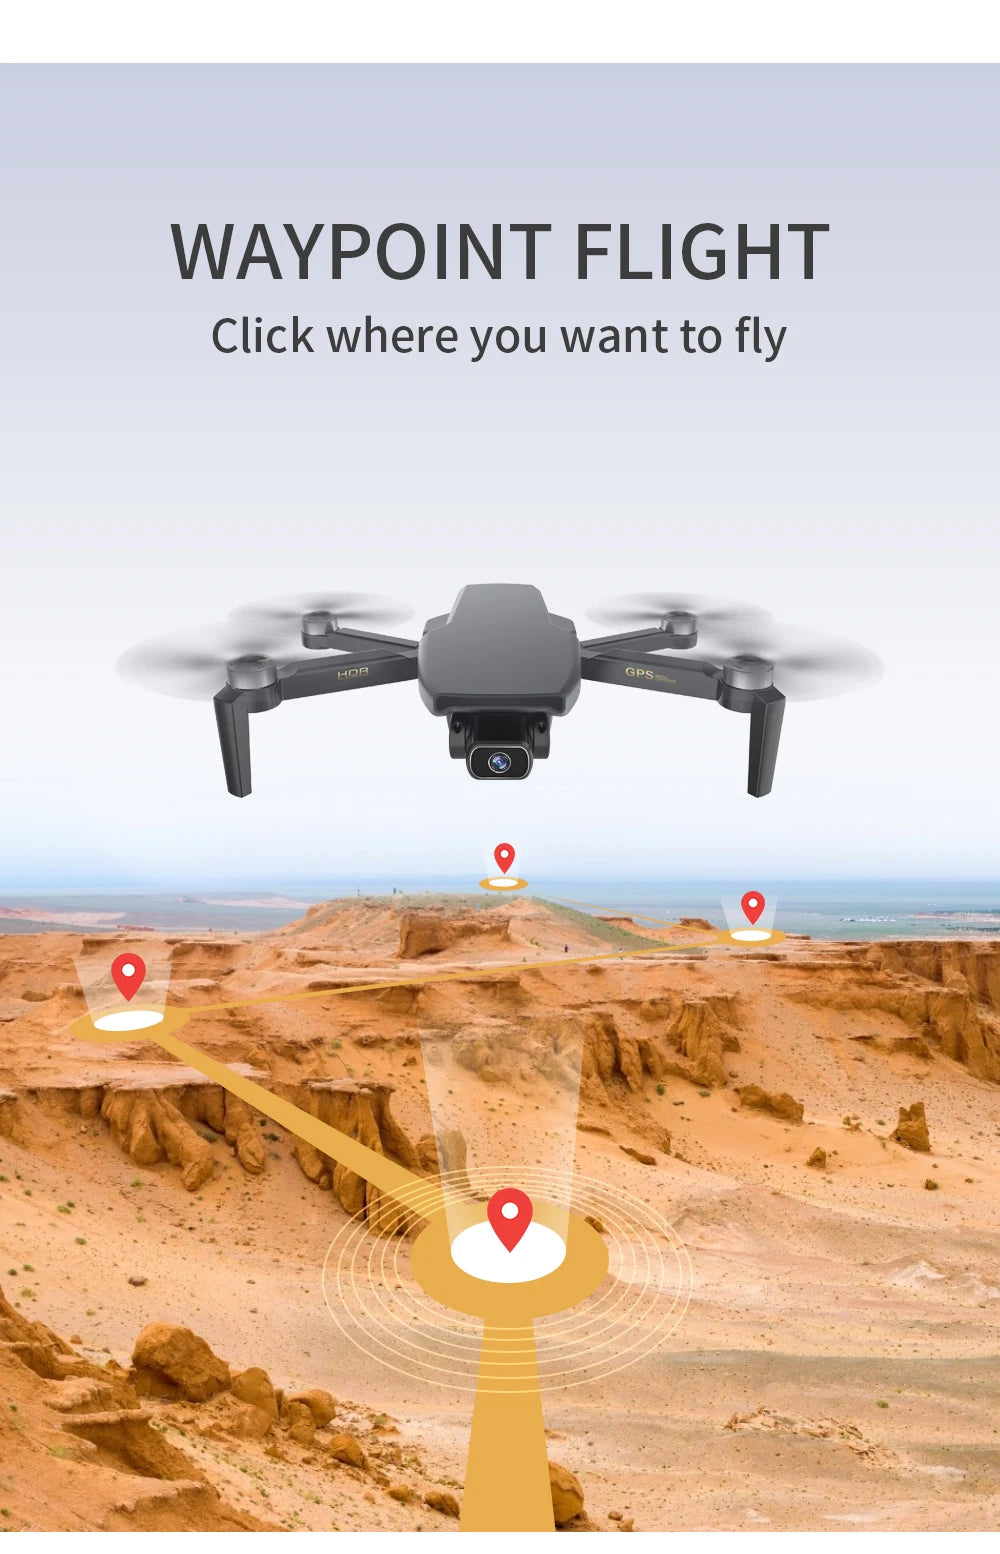 ZLRC SG108 Drone, WAYPOINT FLIGHT Click where you want to fly HOQ GpS